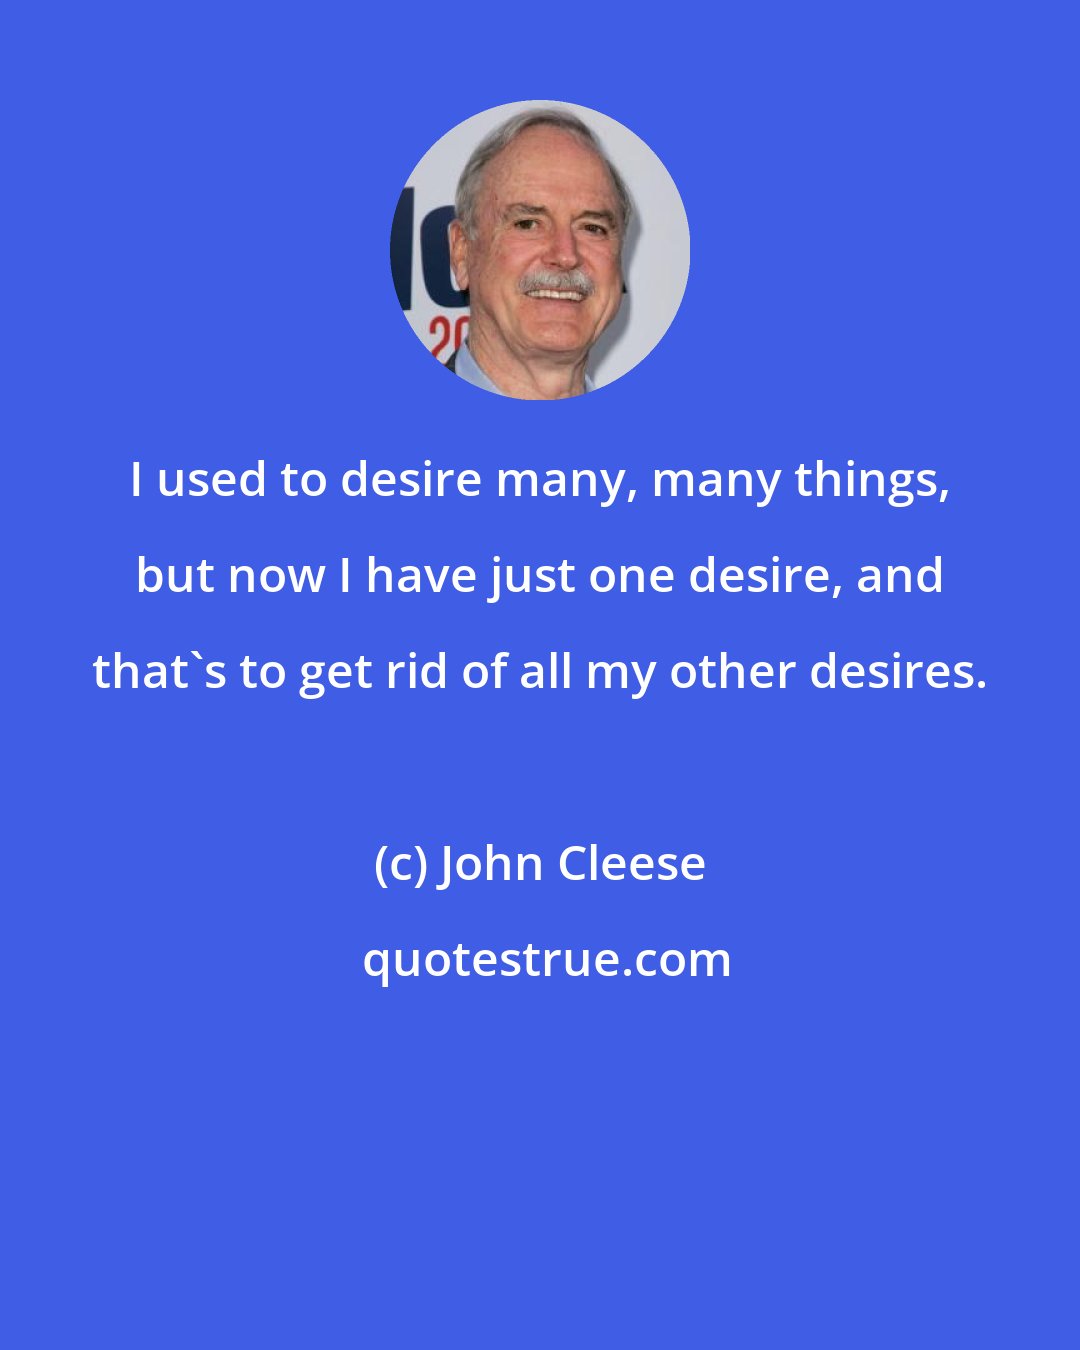 John Cleese: I used to desire many, many things, but now I have just one desire, and that's to get rid of all my other desires.